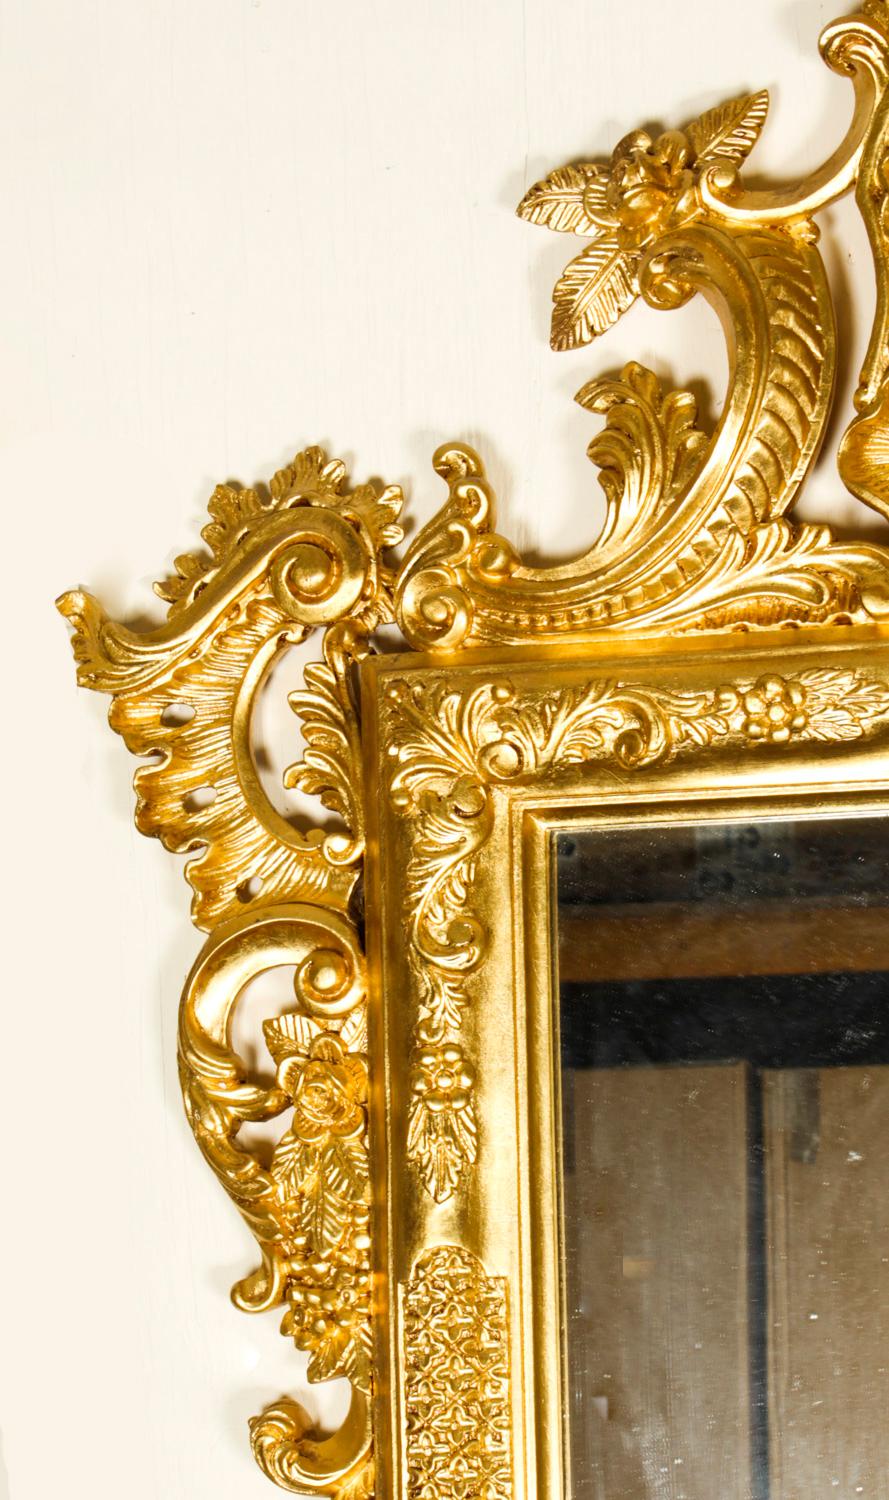 Vintage Monumental Italian Rococo Giltwood Decorative Mirror, 20th C In Good Condition For Sale In London, GB